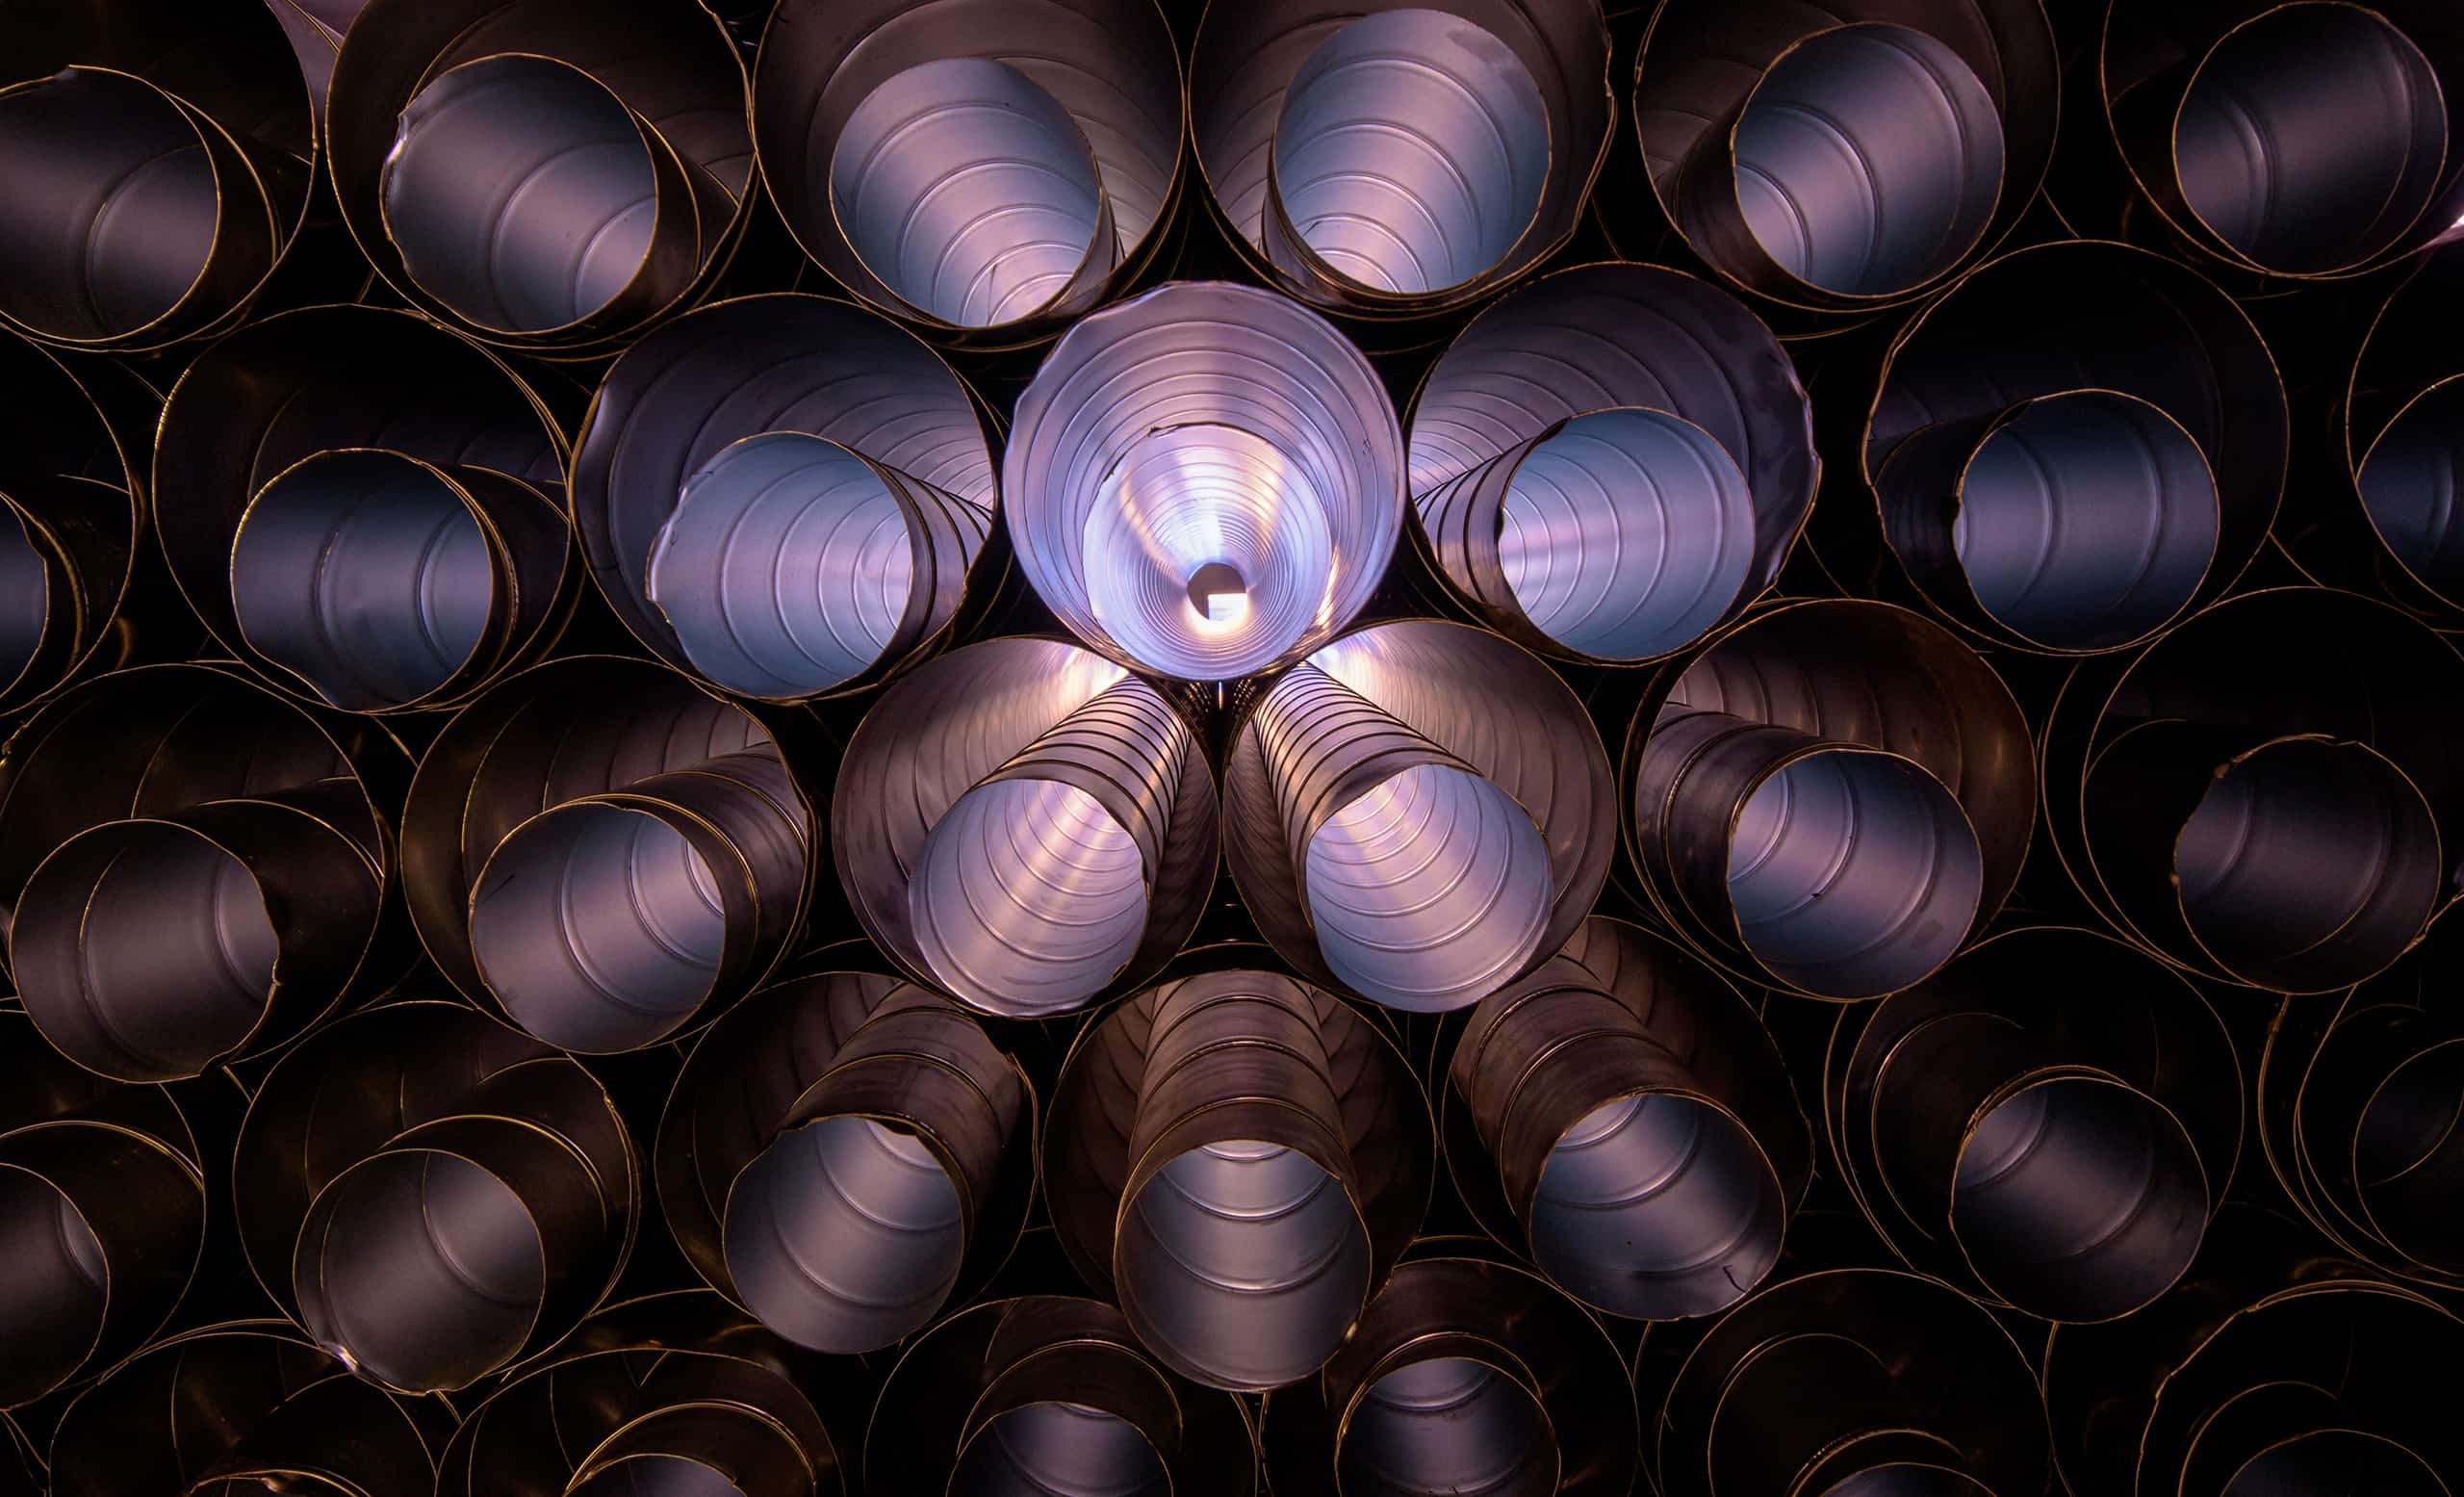 A large collection of round ducts stacked on top of eachother